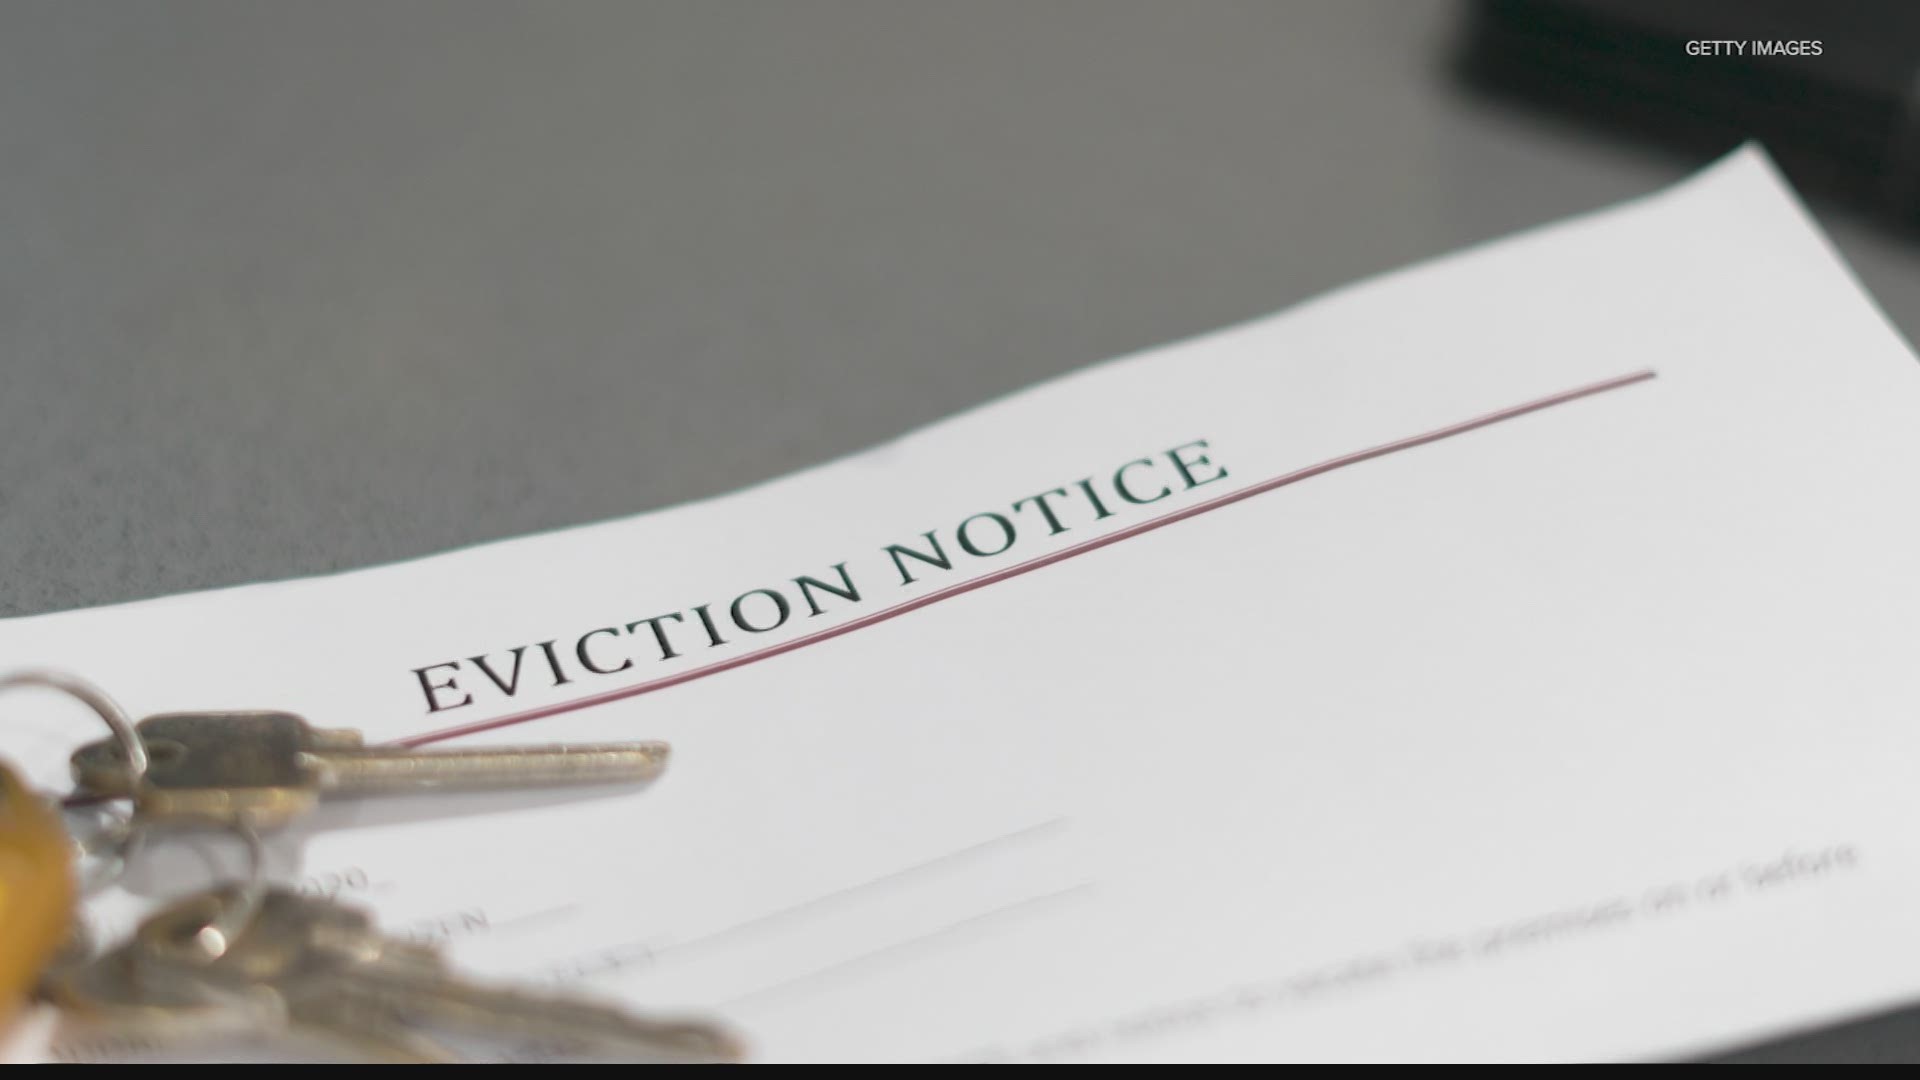 The CDC order temporarily halts residential evictions from Sept. 4 through Dec. 31, 2020.